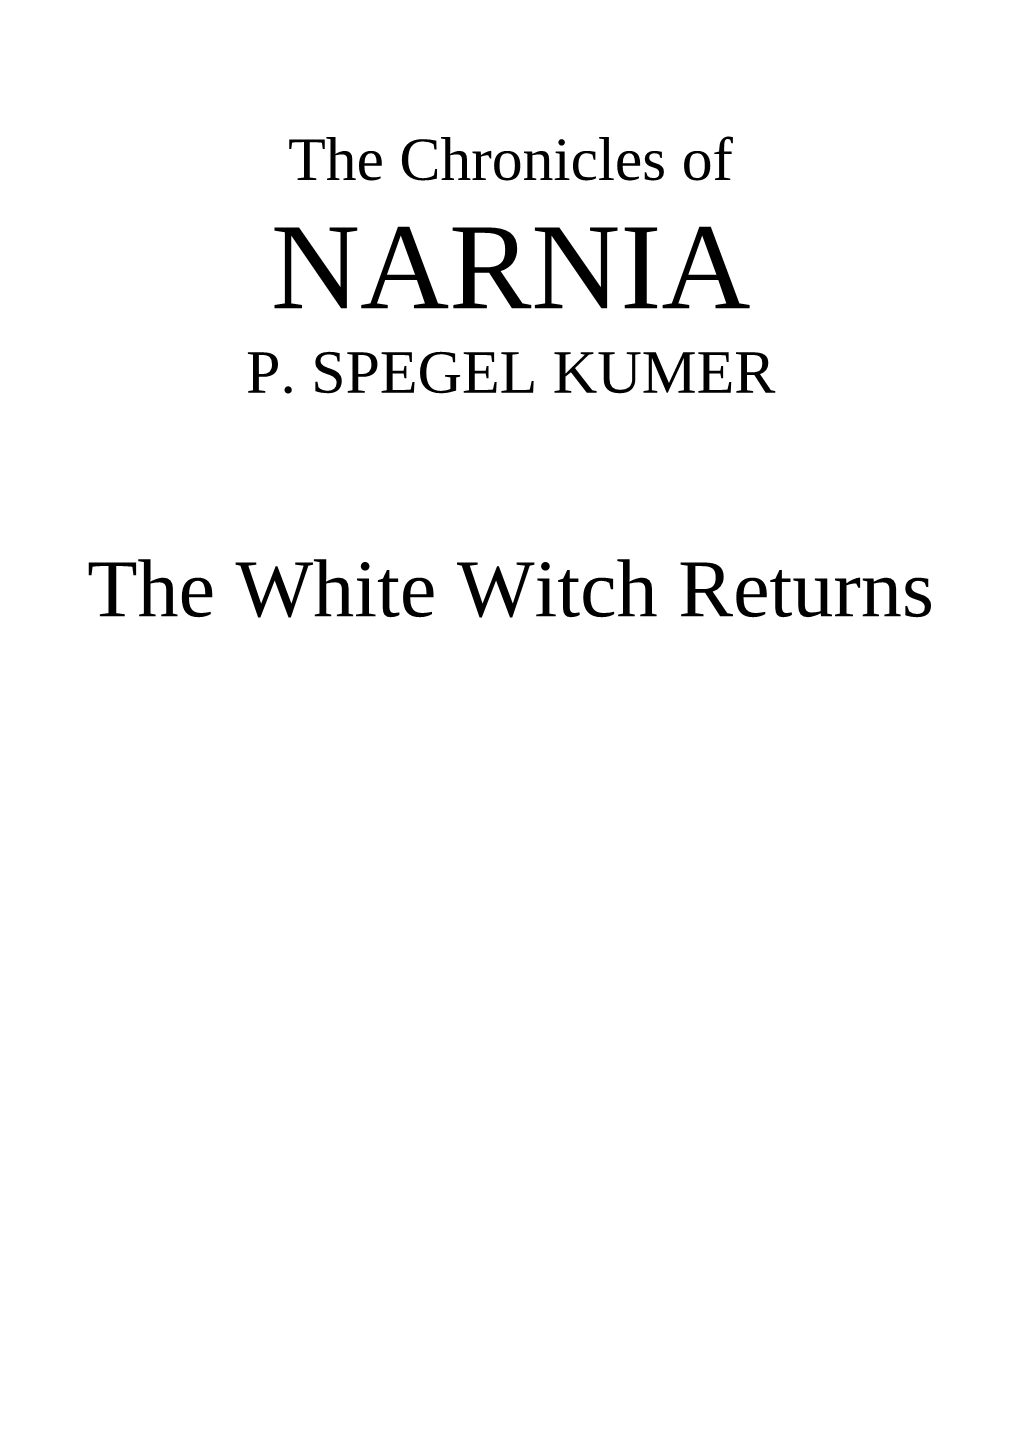 The White Witch Returns